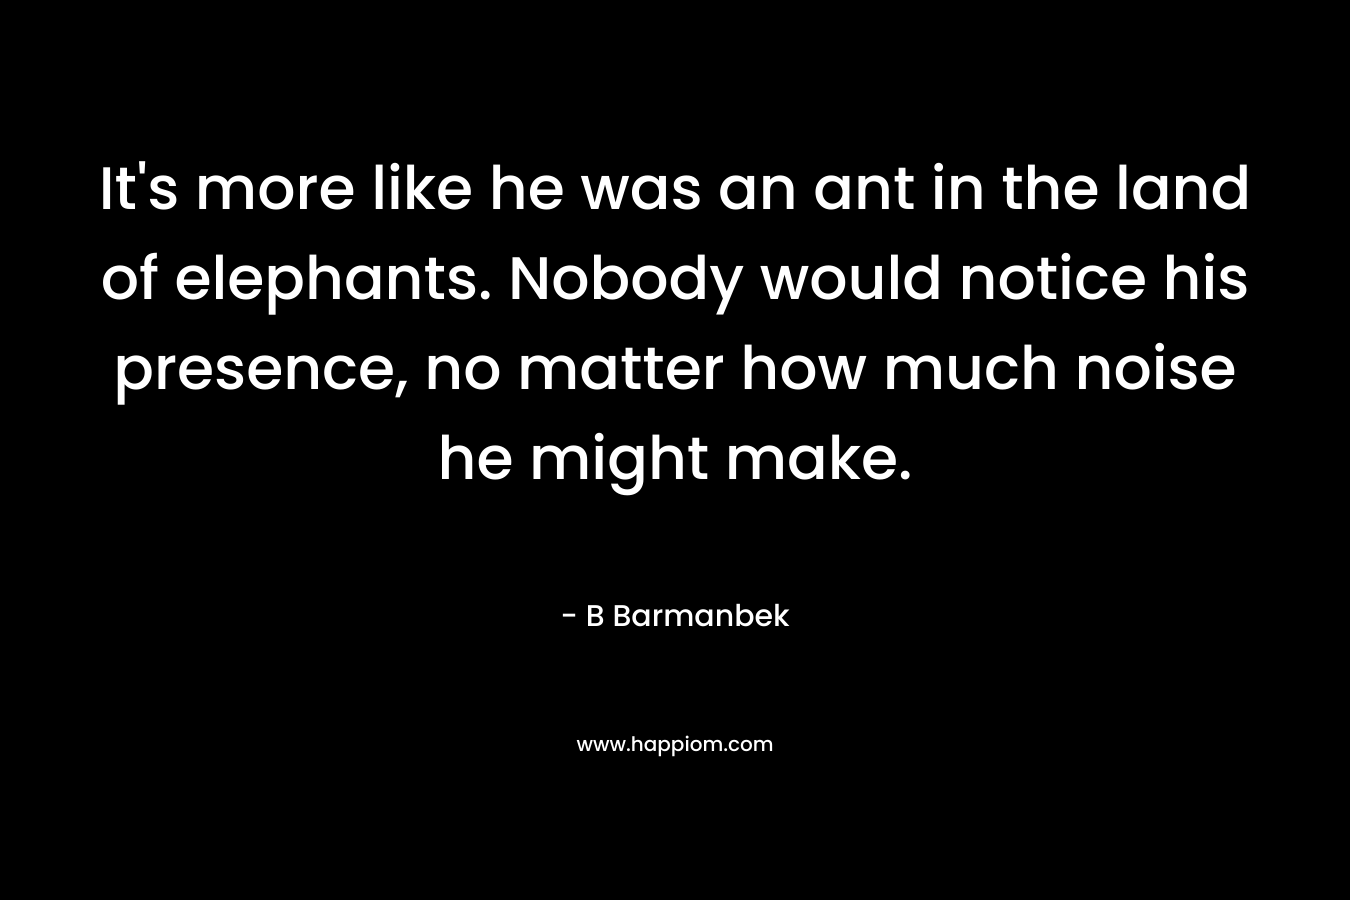 It’s more like he was an ant in the land of elephants. Nobody would notice his presence, no matter how much noise he might make. – B Barmanbek